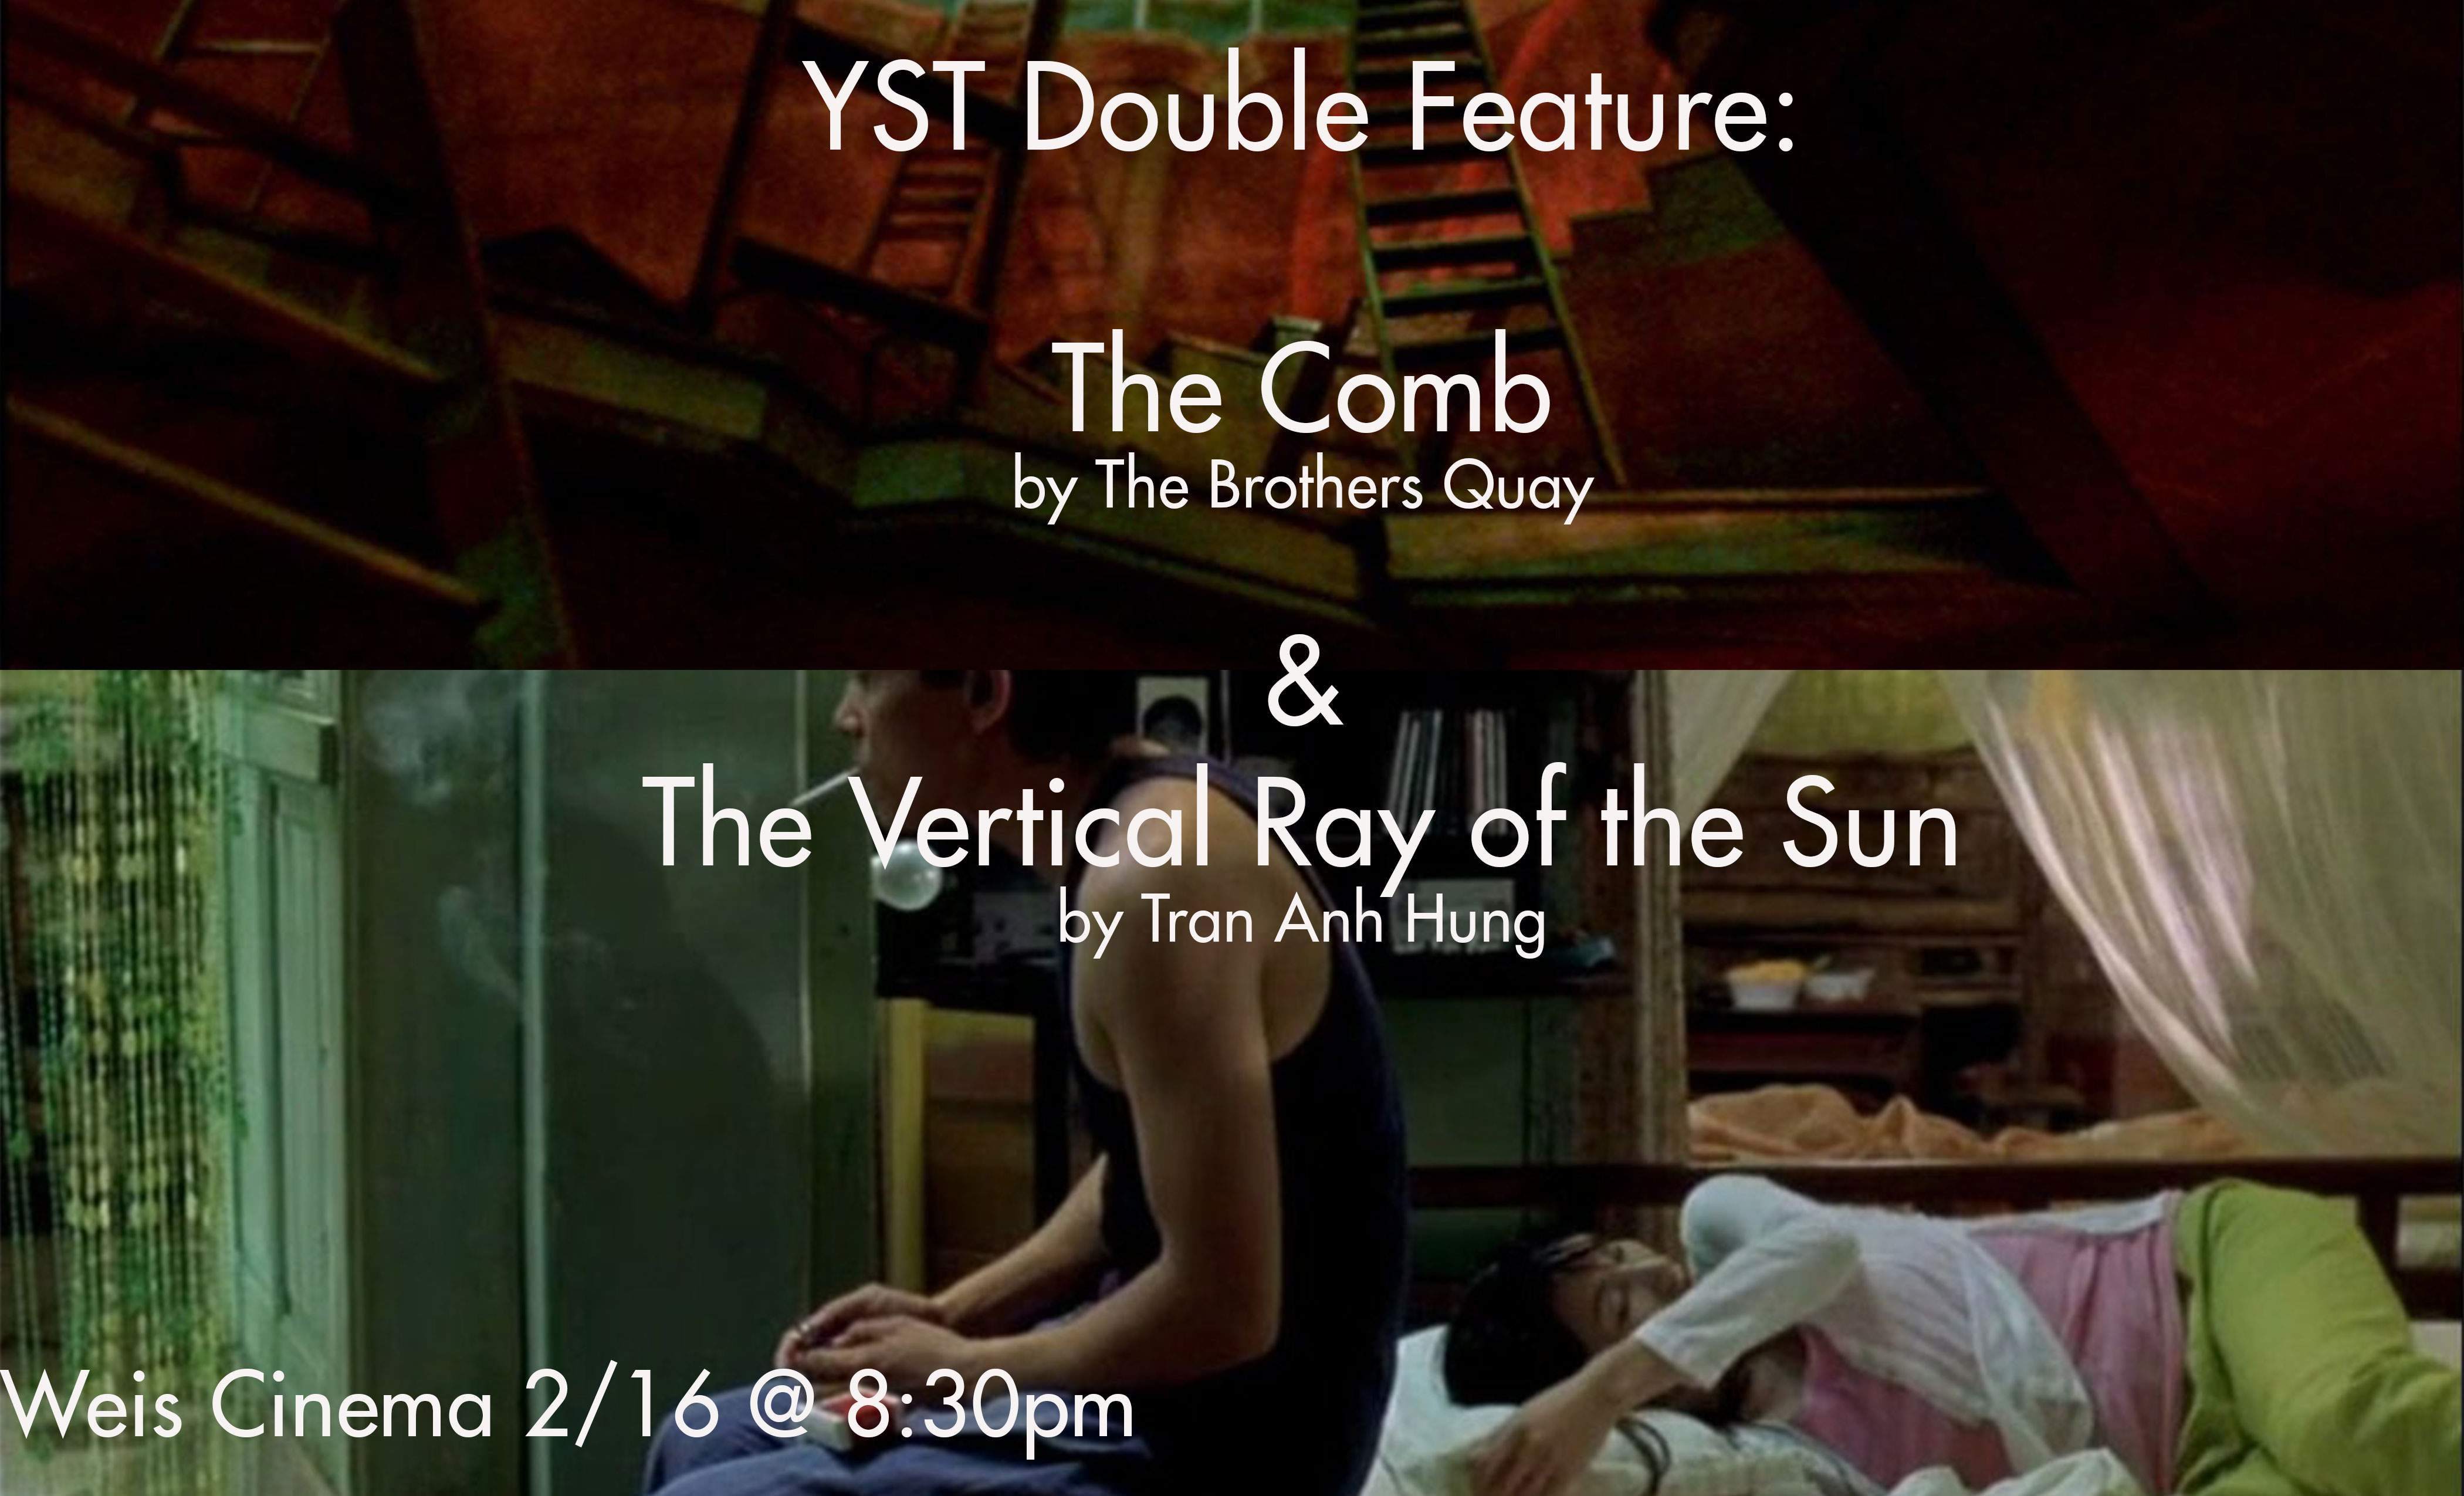 YST Presents: The Comb and The Vertical Ray of the Sun